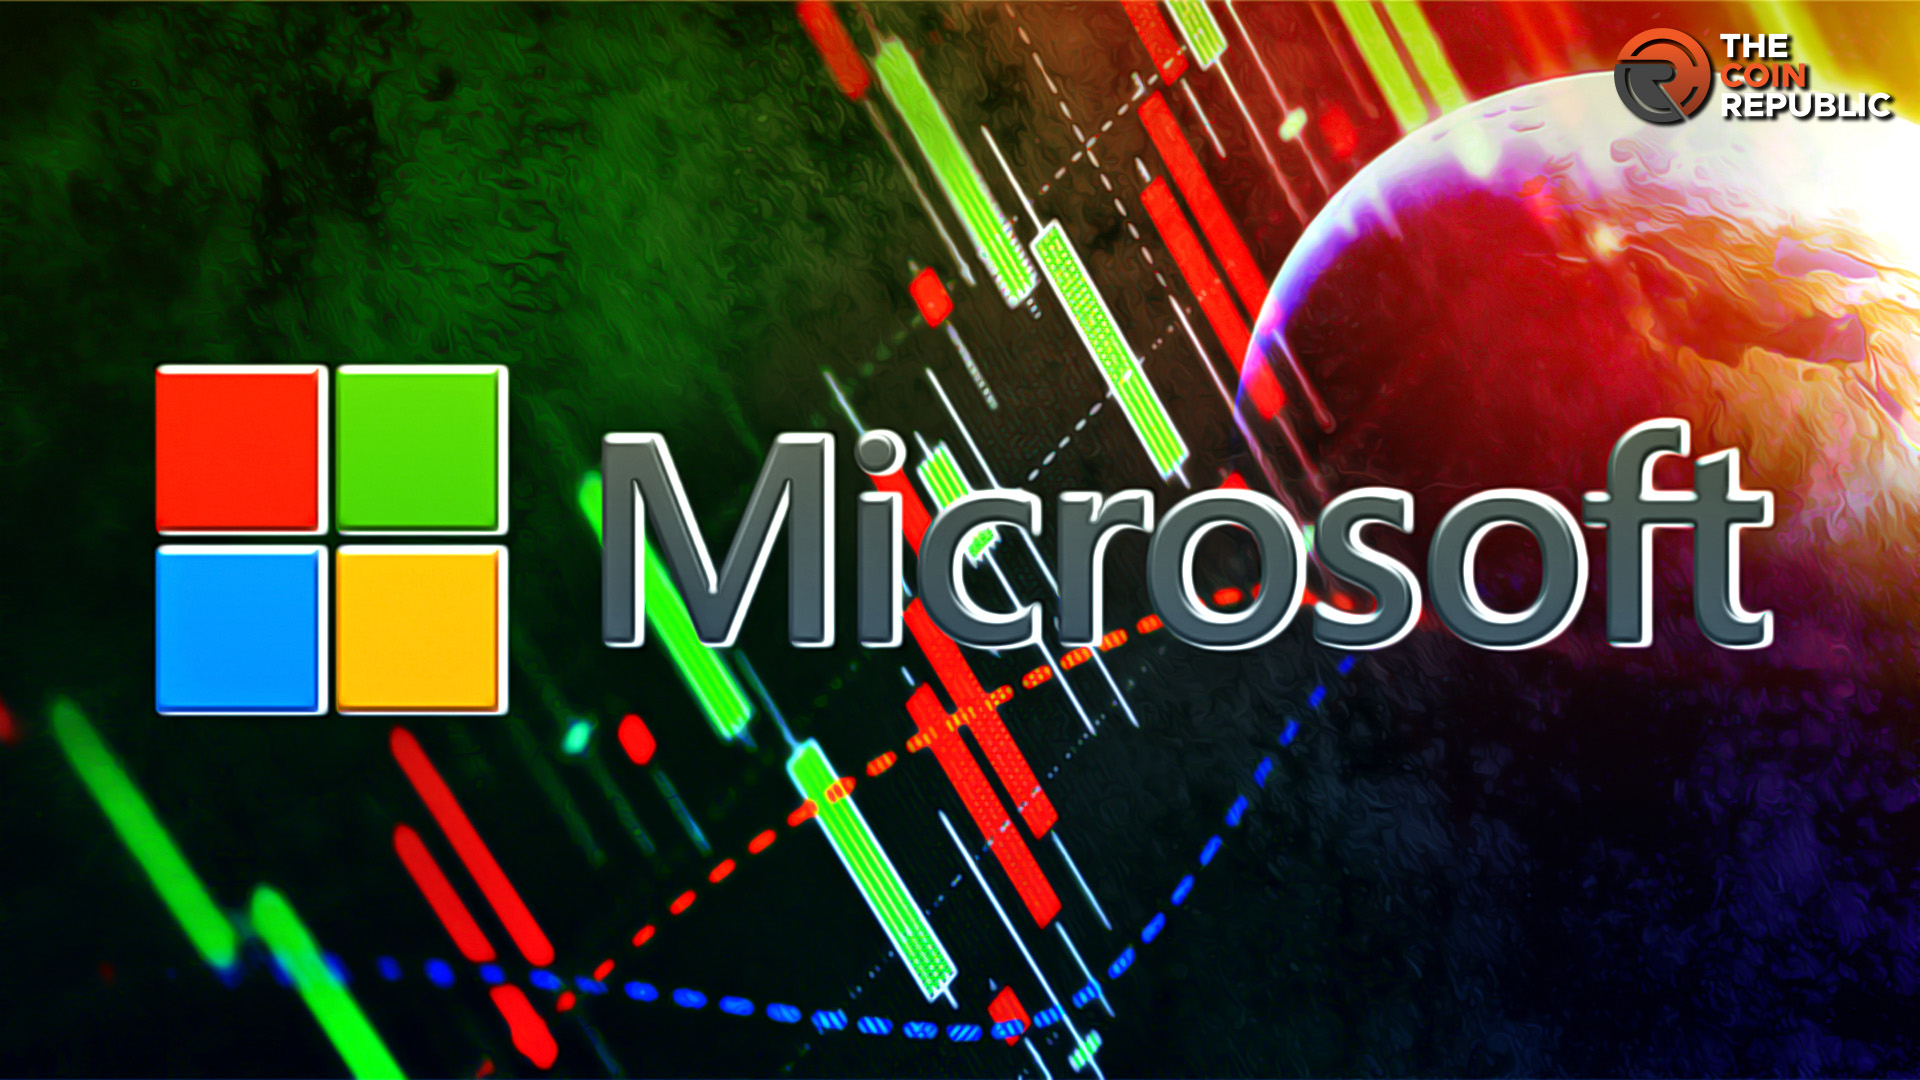 MSFT Stock: Microsoft Stock Reacts Positively After Earnings